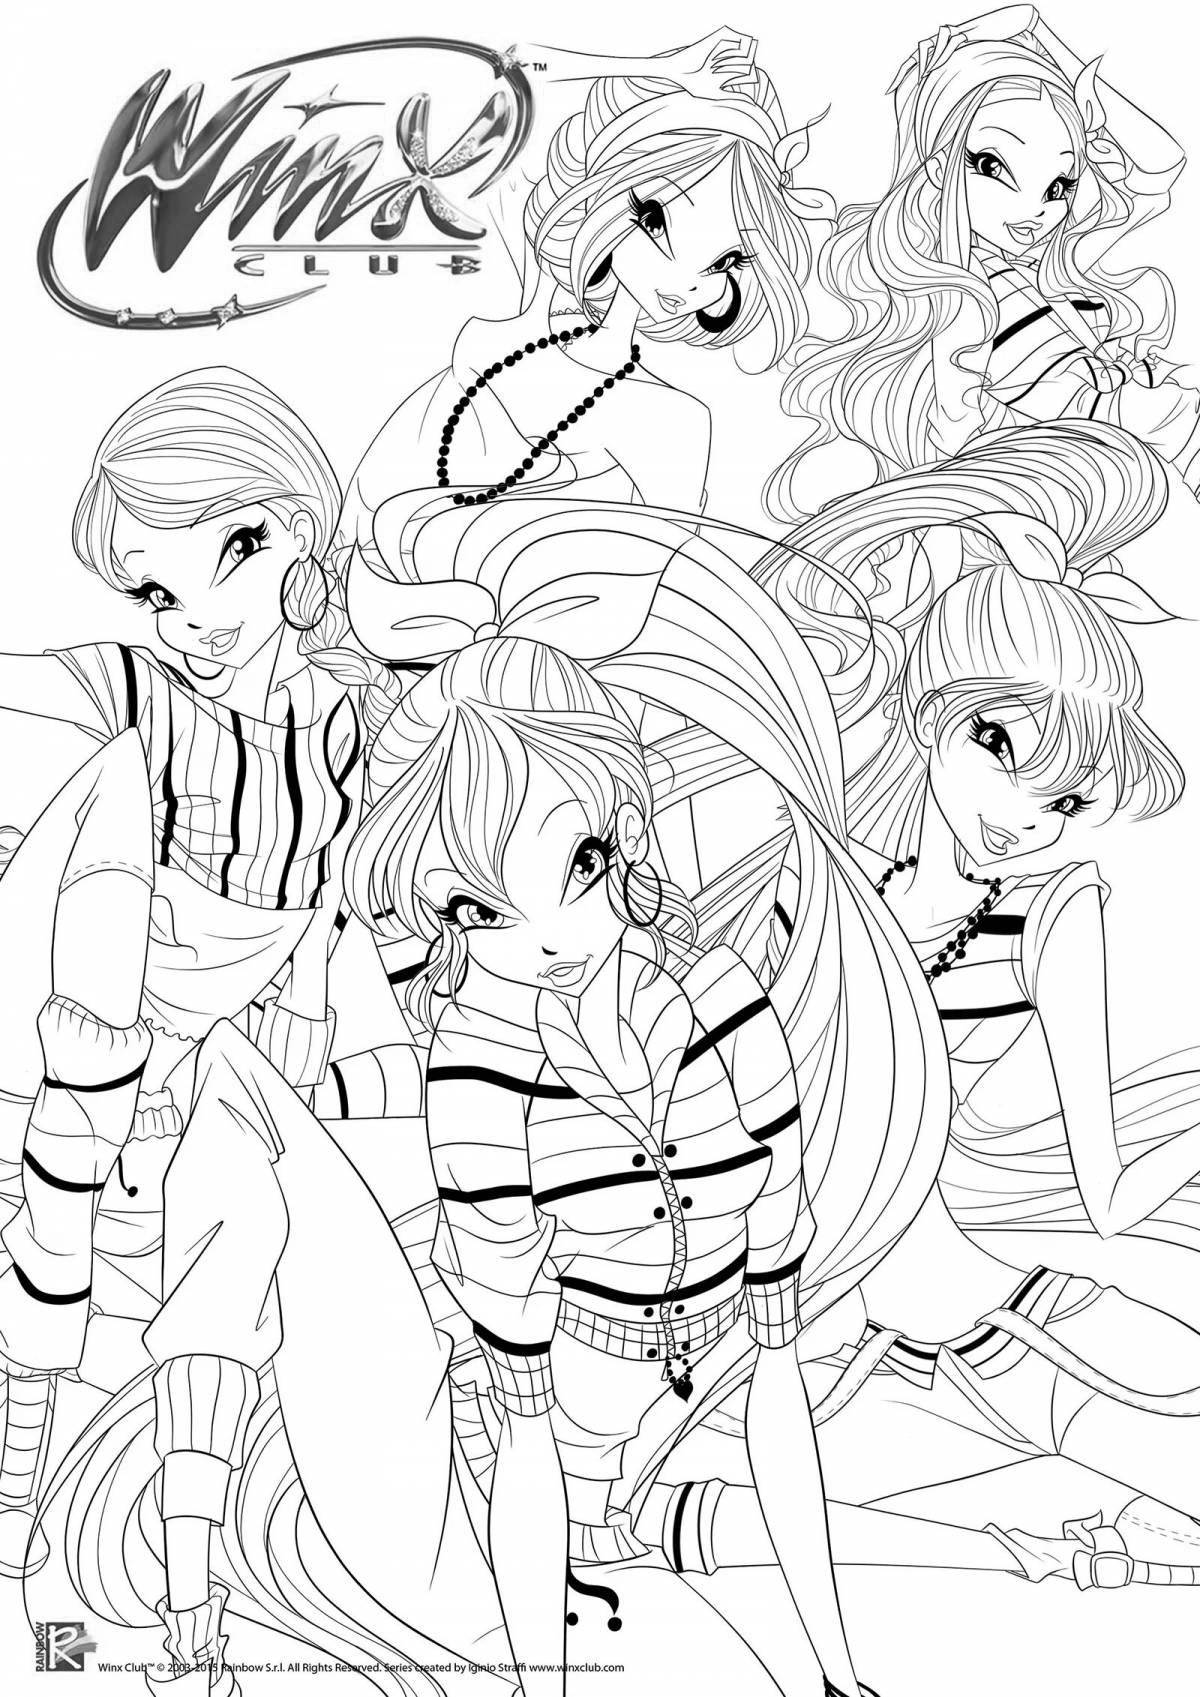 Fascinating coloring world of winx